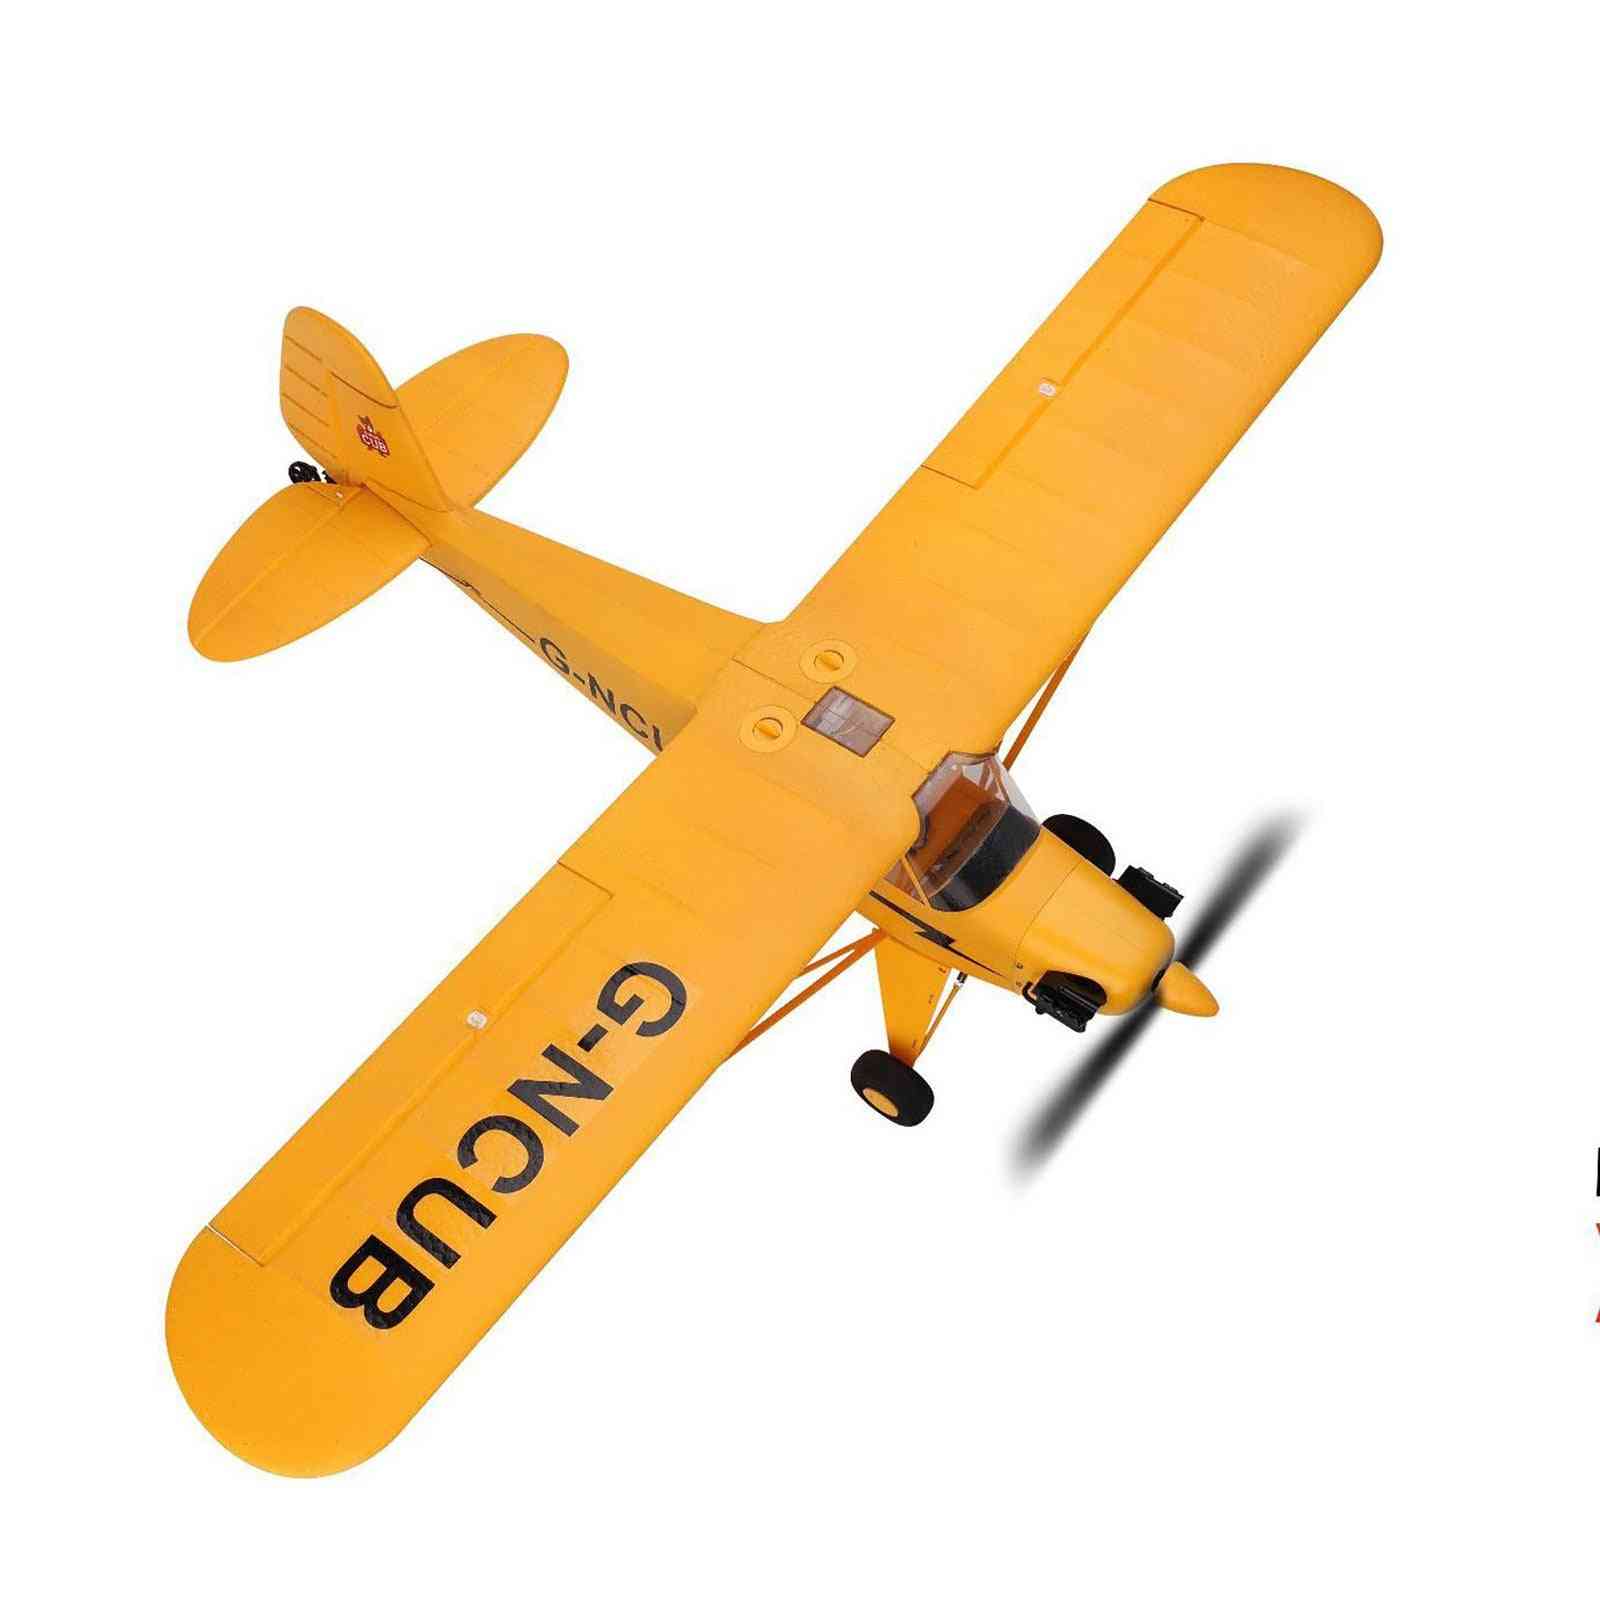 Xk A160 Rc Plane 3d High-performance 1406 Brushless Motor Airplane Rc Drone